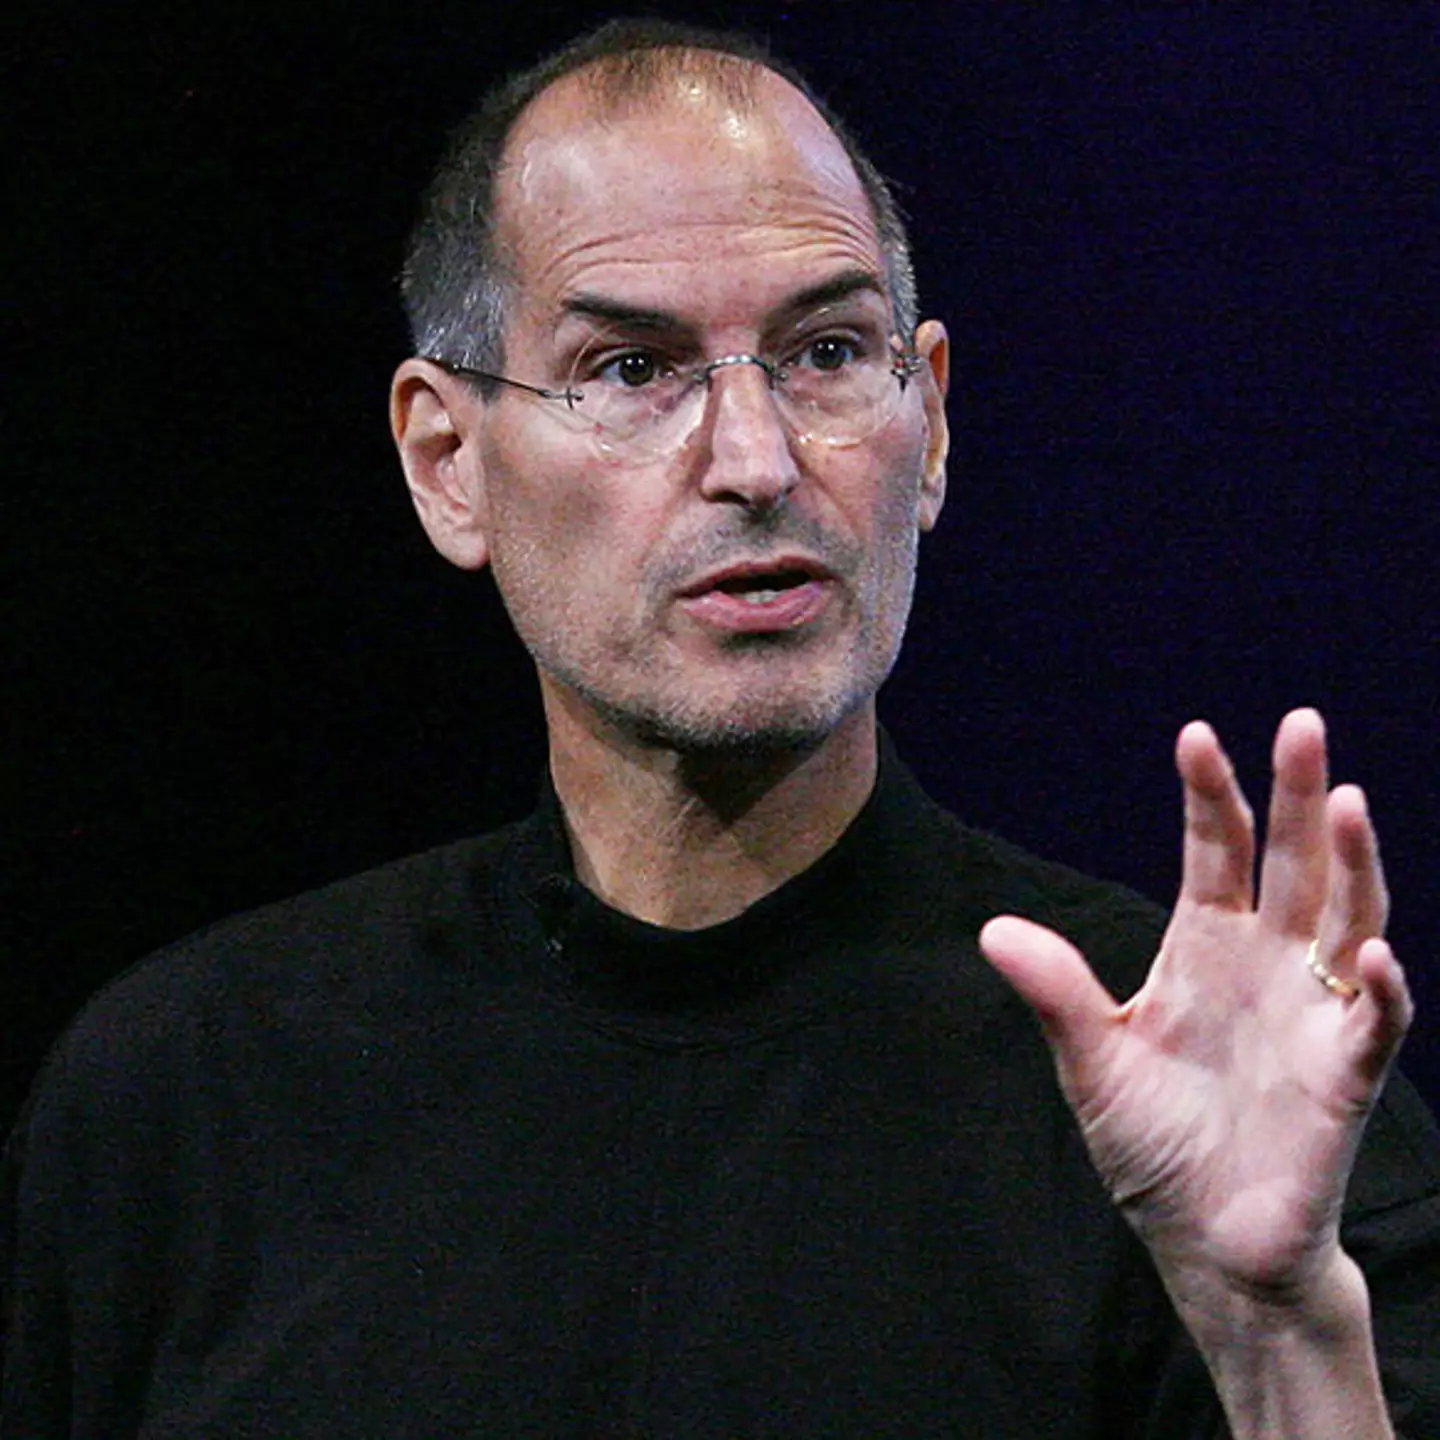 The unusual question Steve Jobs began every meeting with